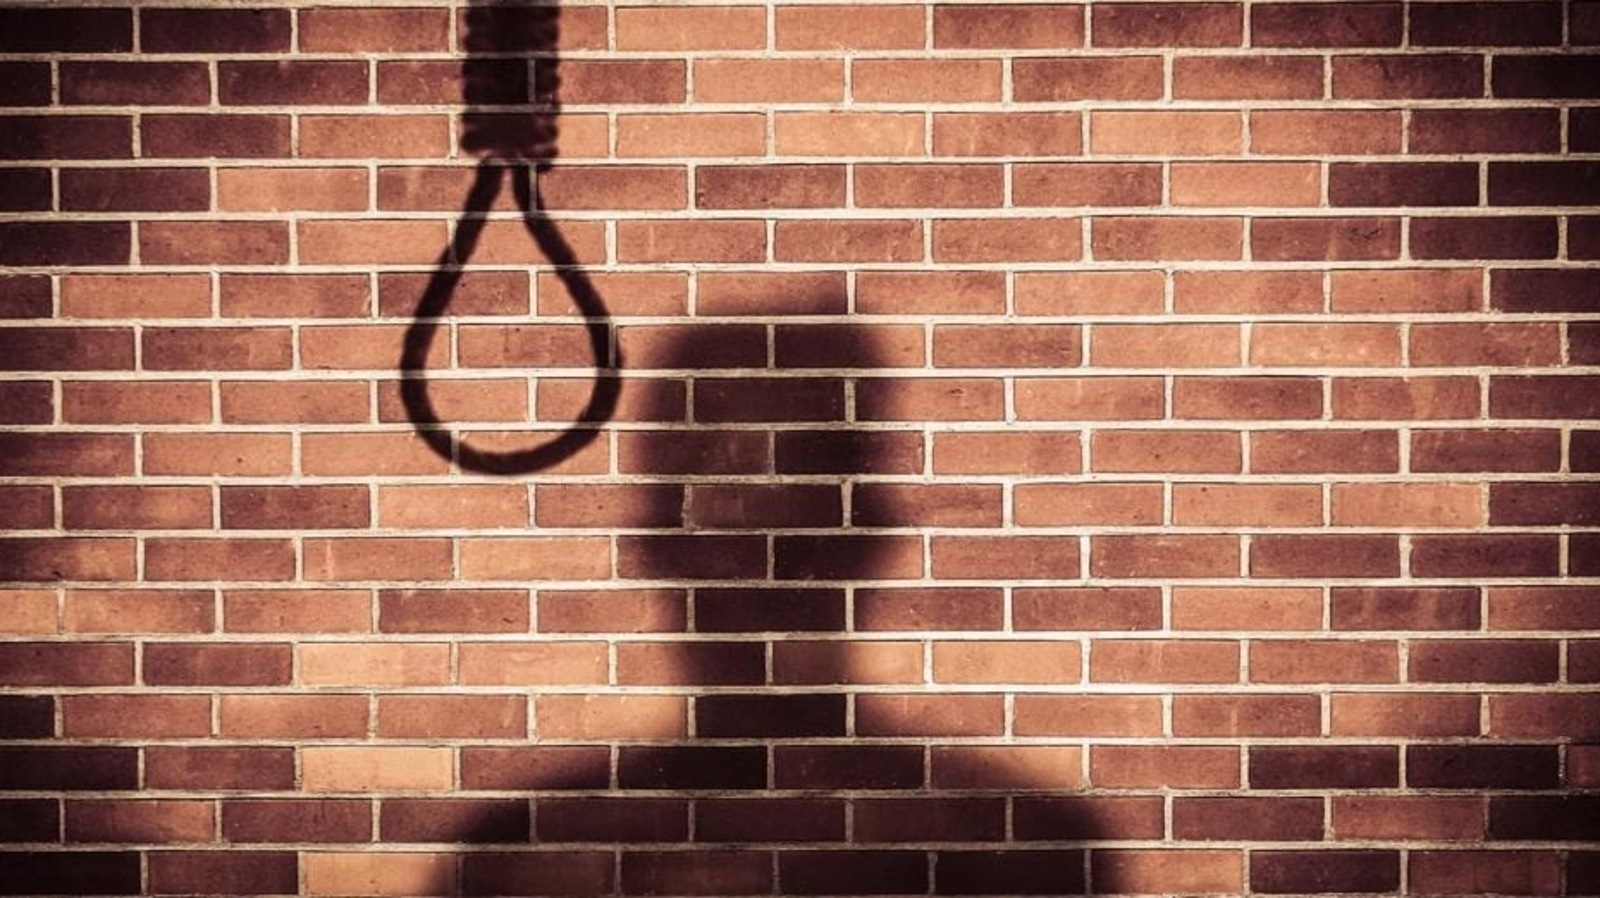 bengaluru-man-allegedly-harassed-over-loan-suspected-to-have-died-by-suicide